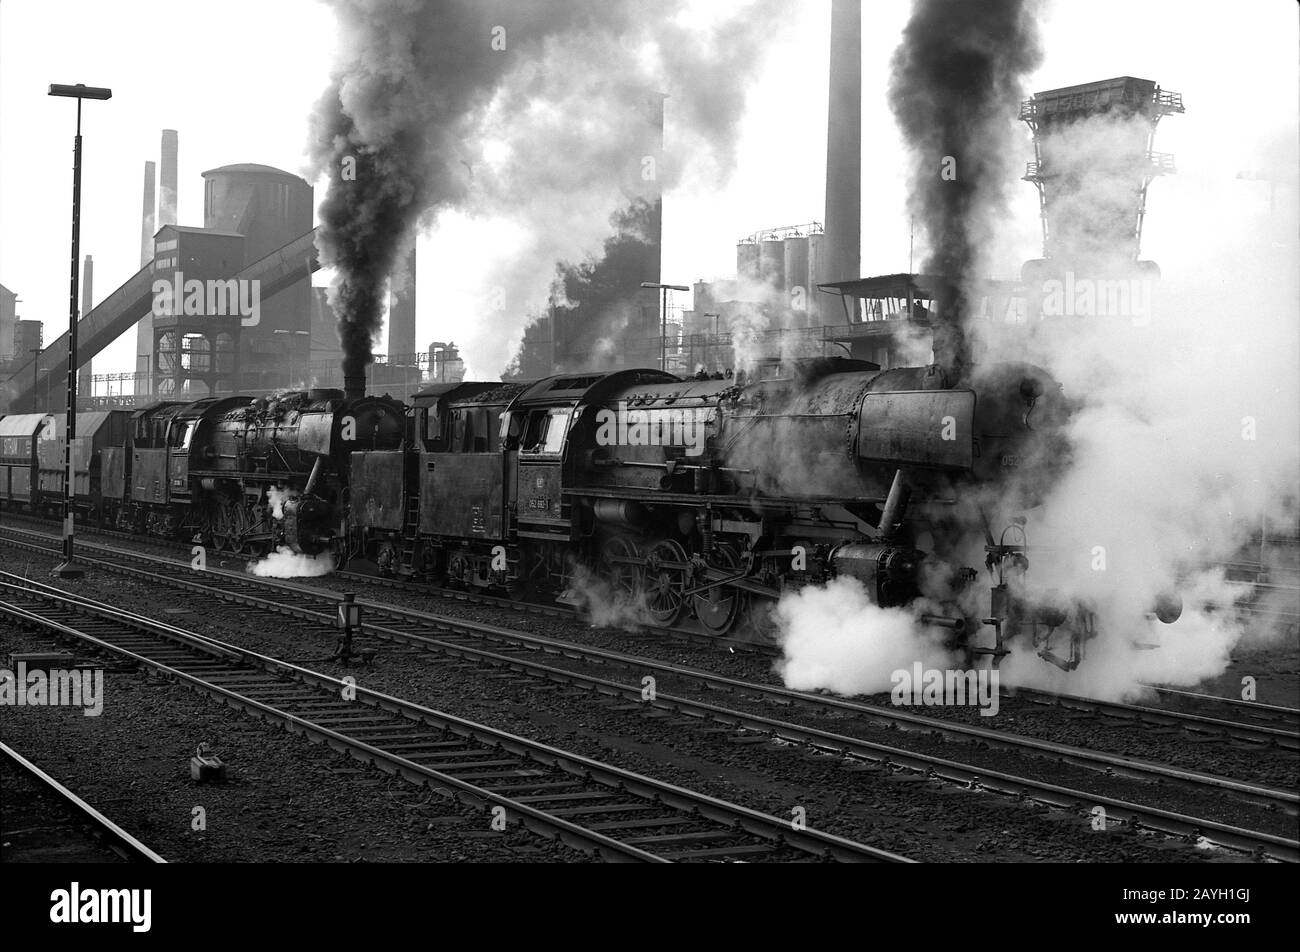 German Steam locomotives EBV coking plant in Alsdorf, Germany, near Aachen in 1975 Coal pollution Germany. West Germany 1970s Europe European pollution coal industrial climate change crisis Stock Photo